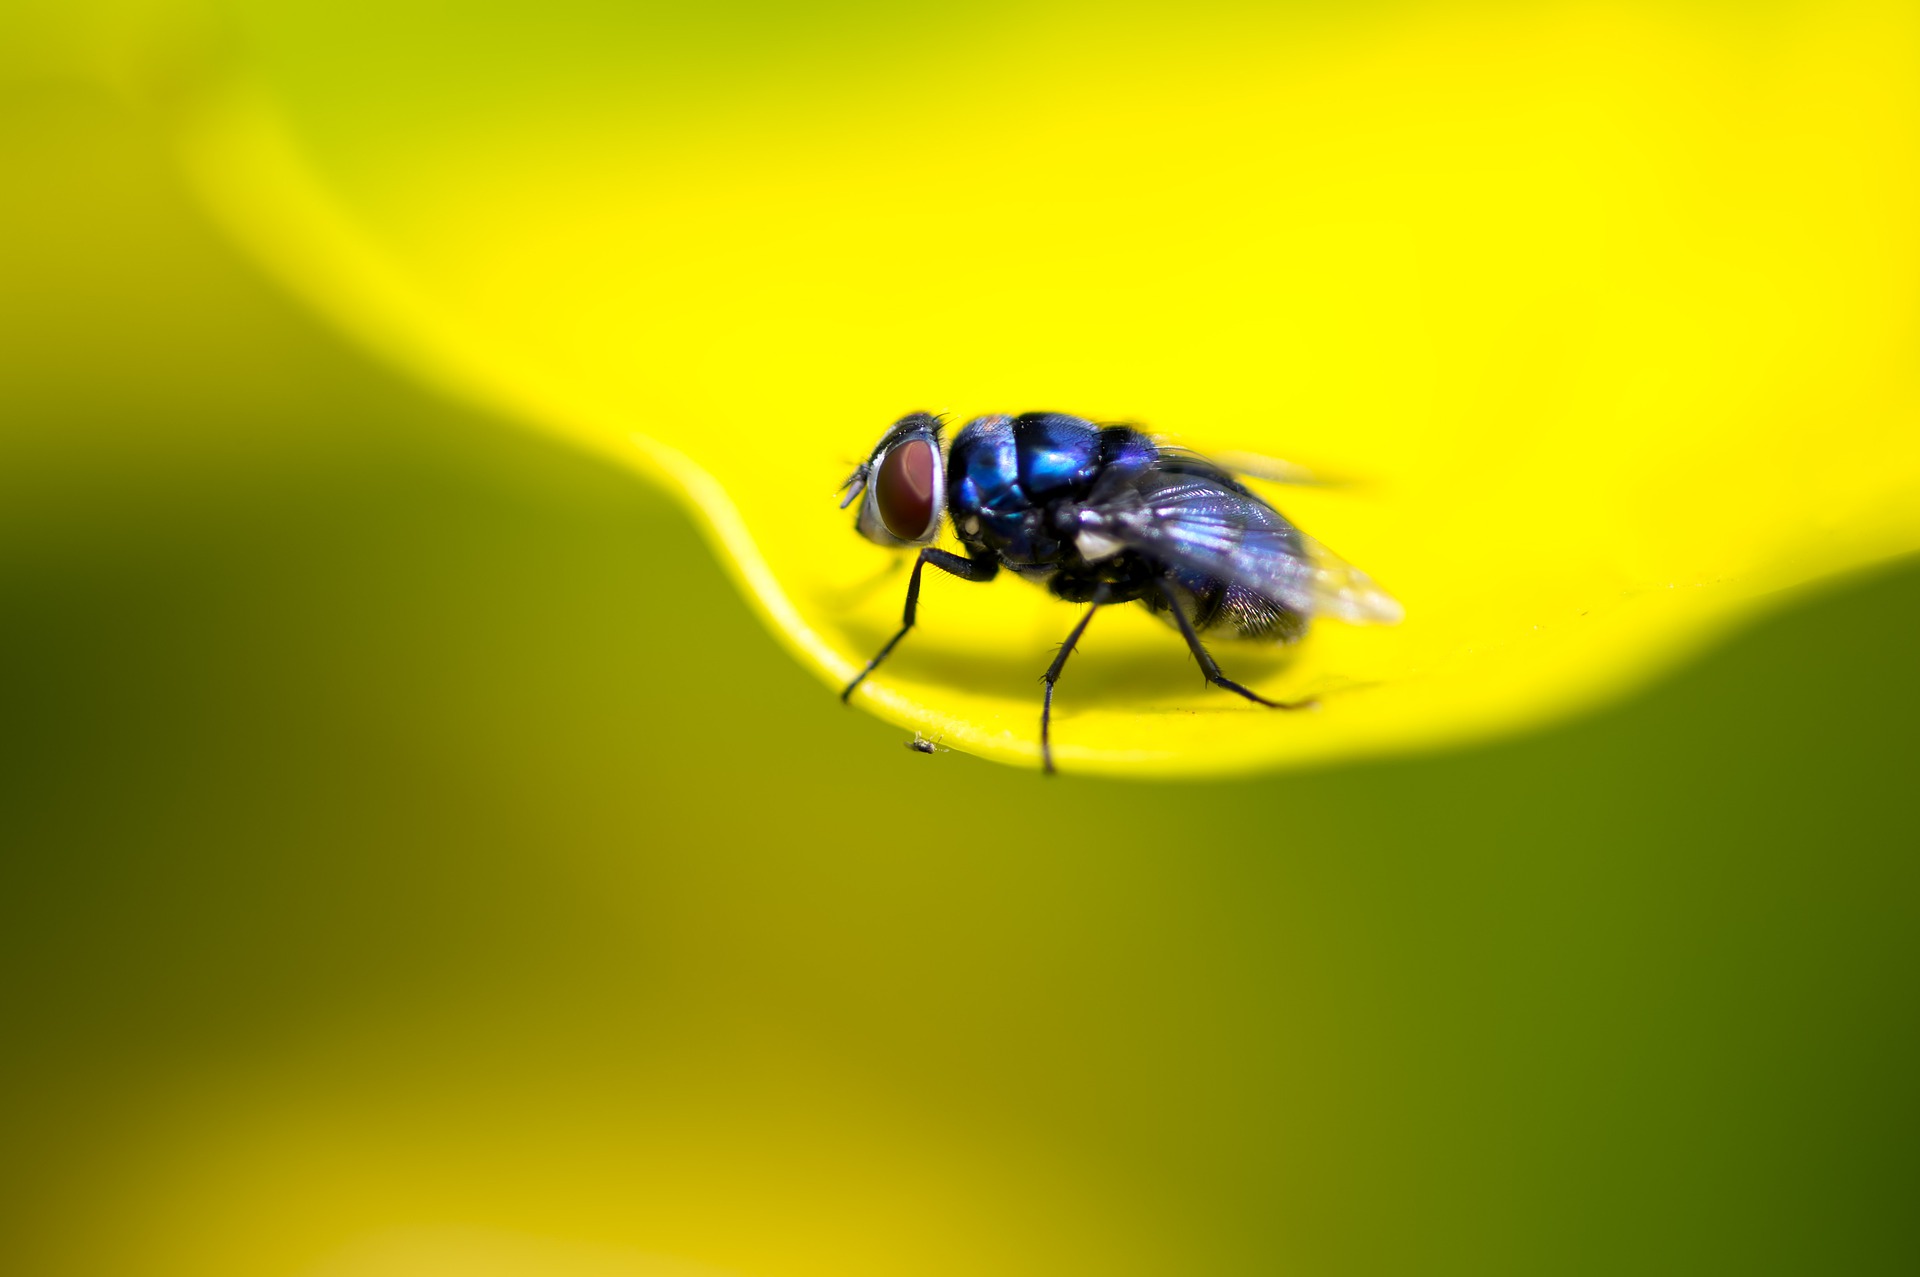 blue-fly-4798384_1920